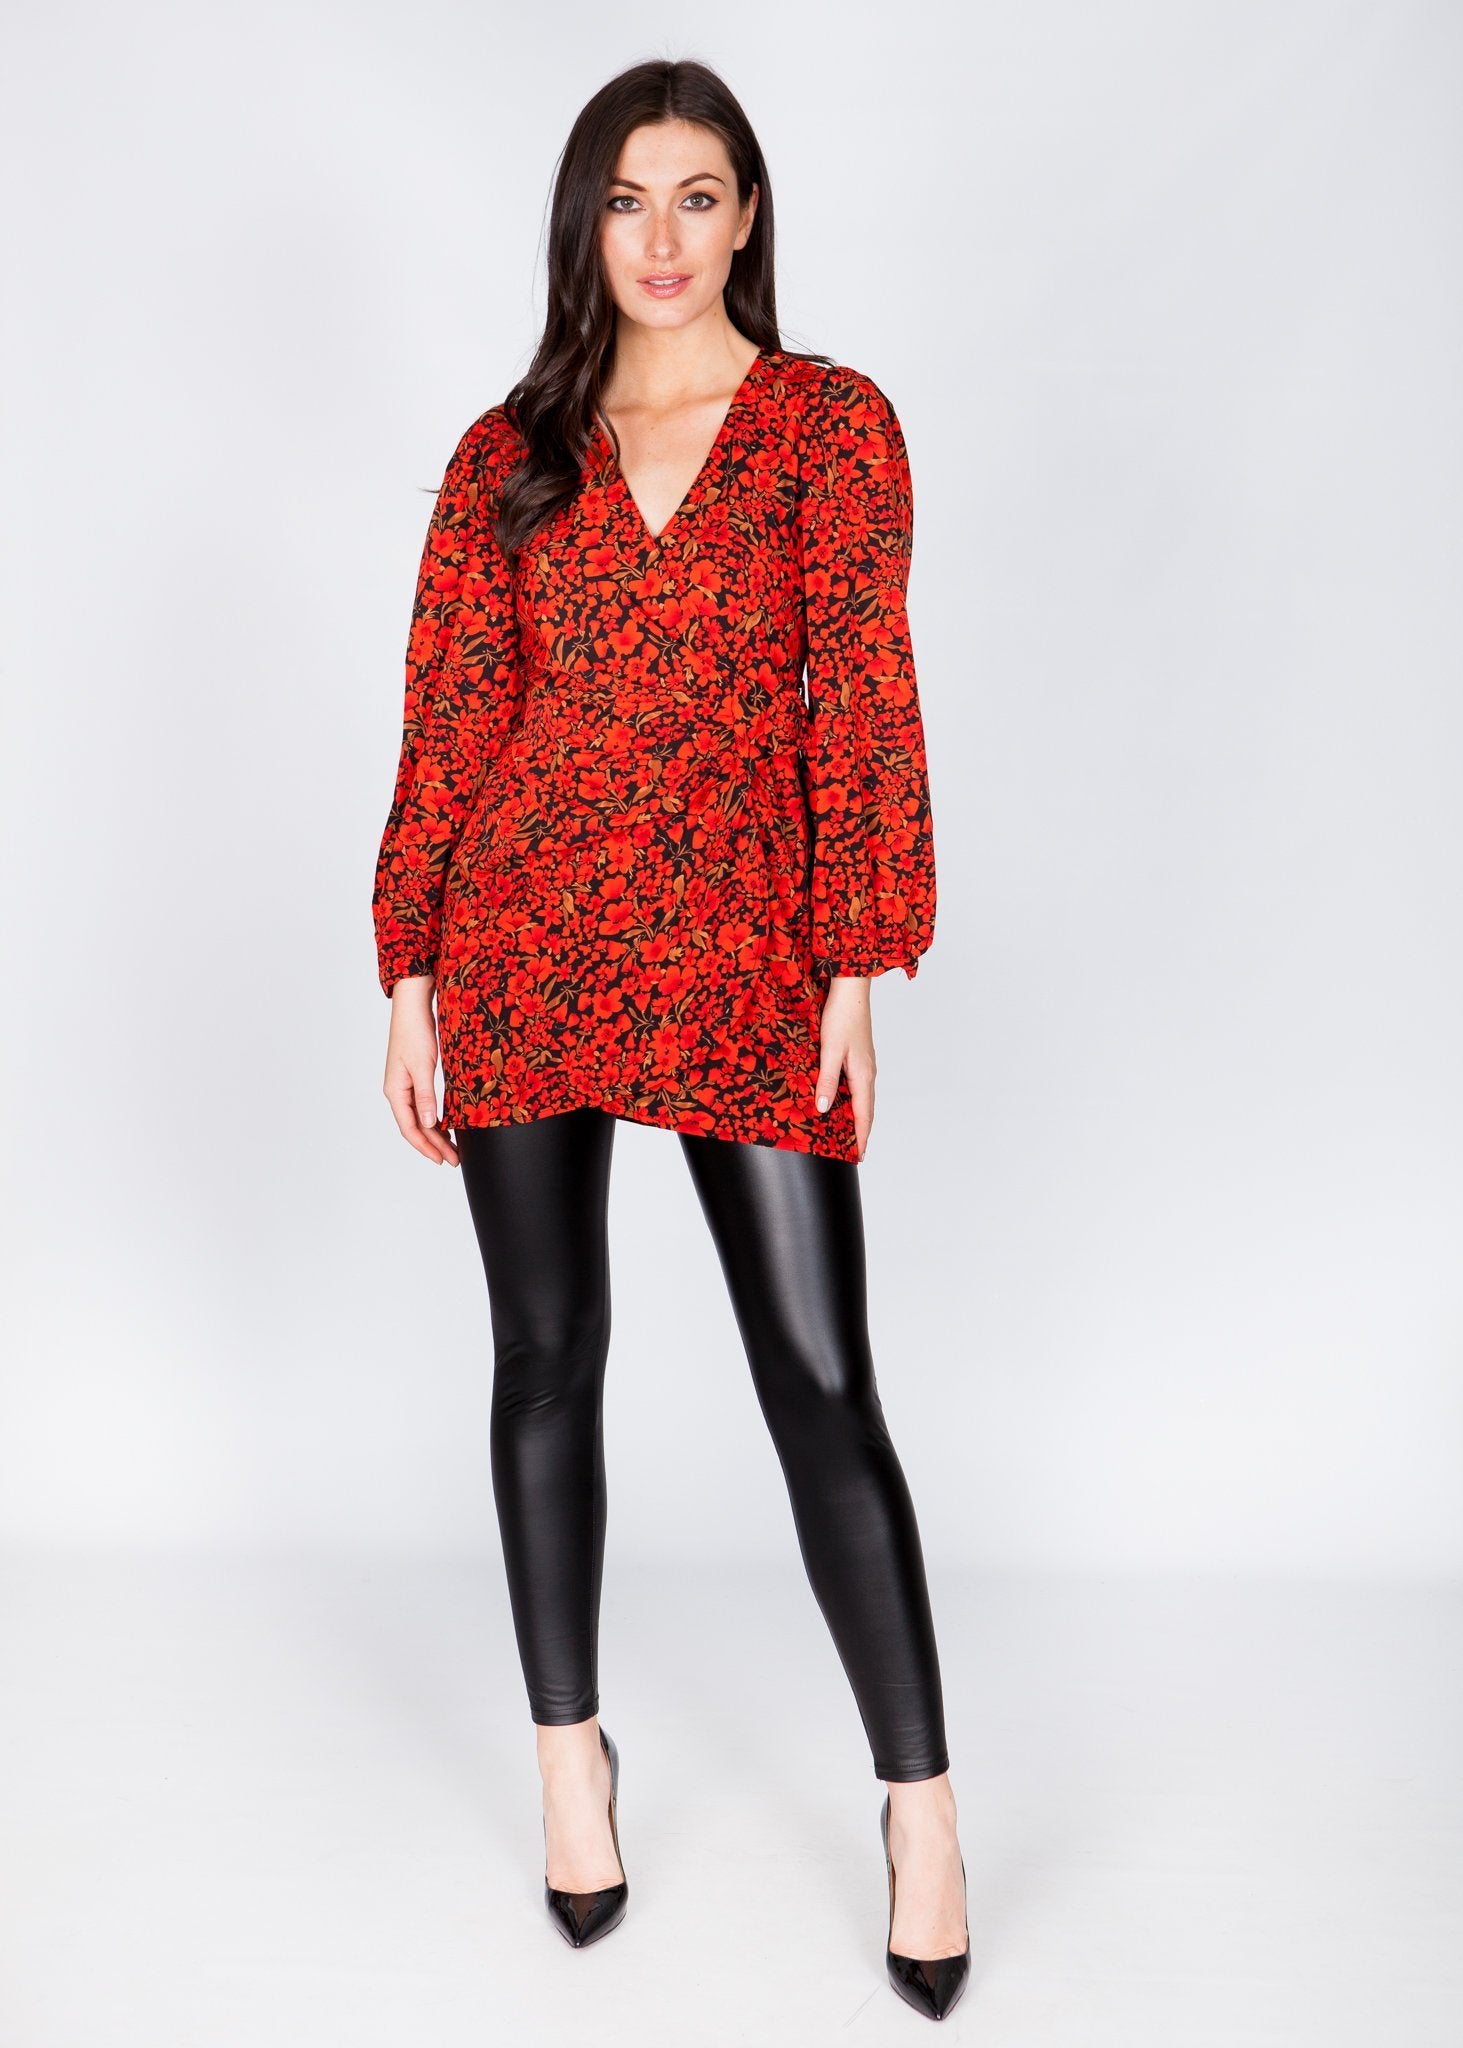 Kate Floral Wrap Top In Red - The Walk in Wardrobe